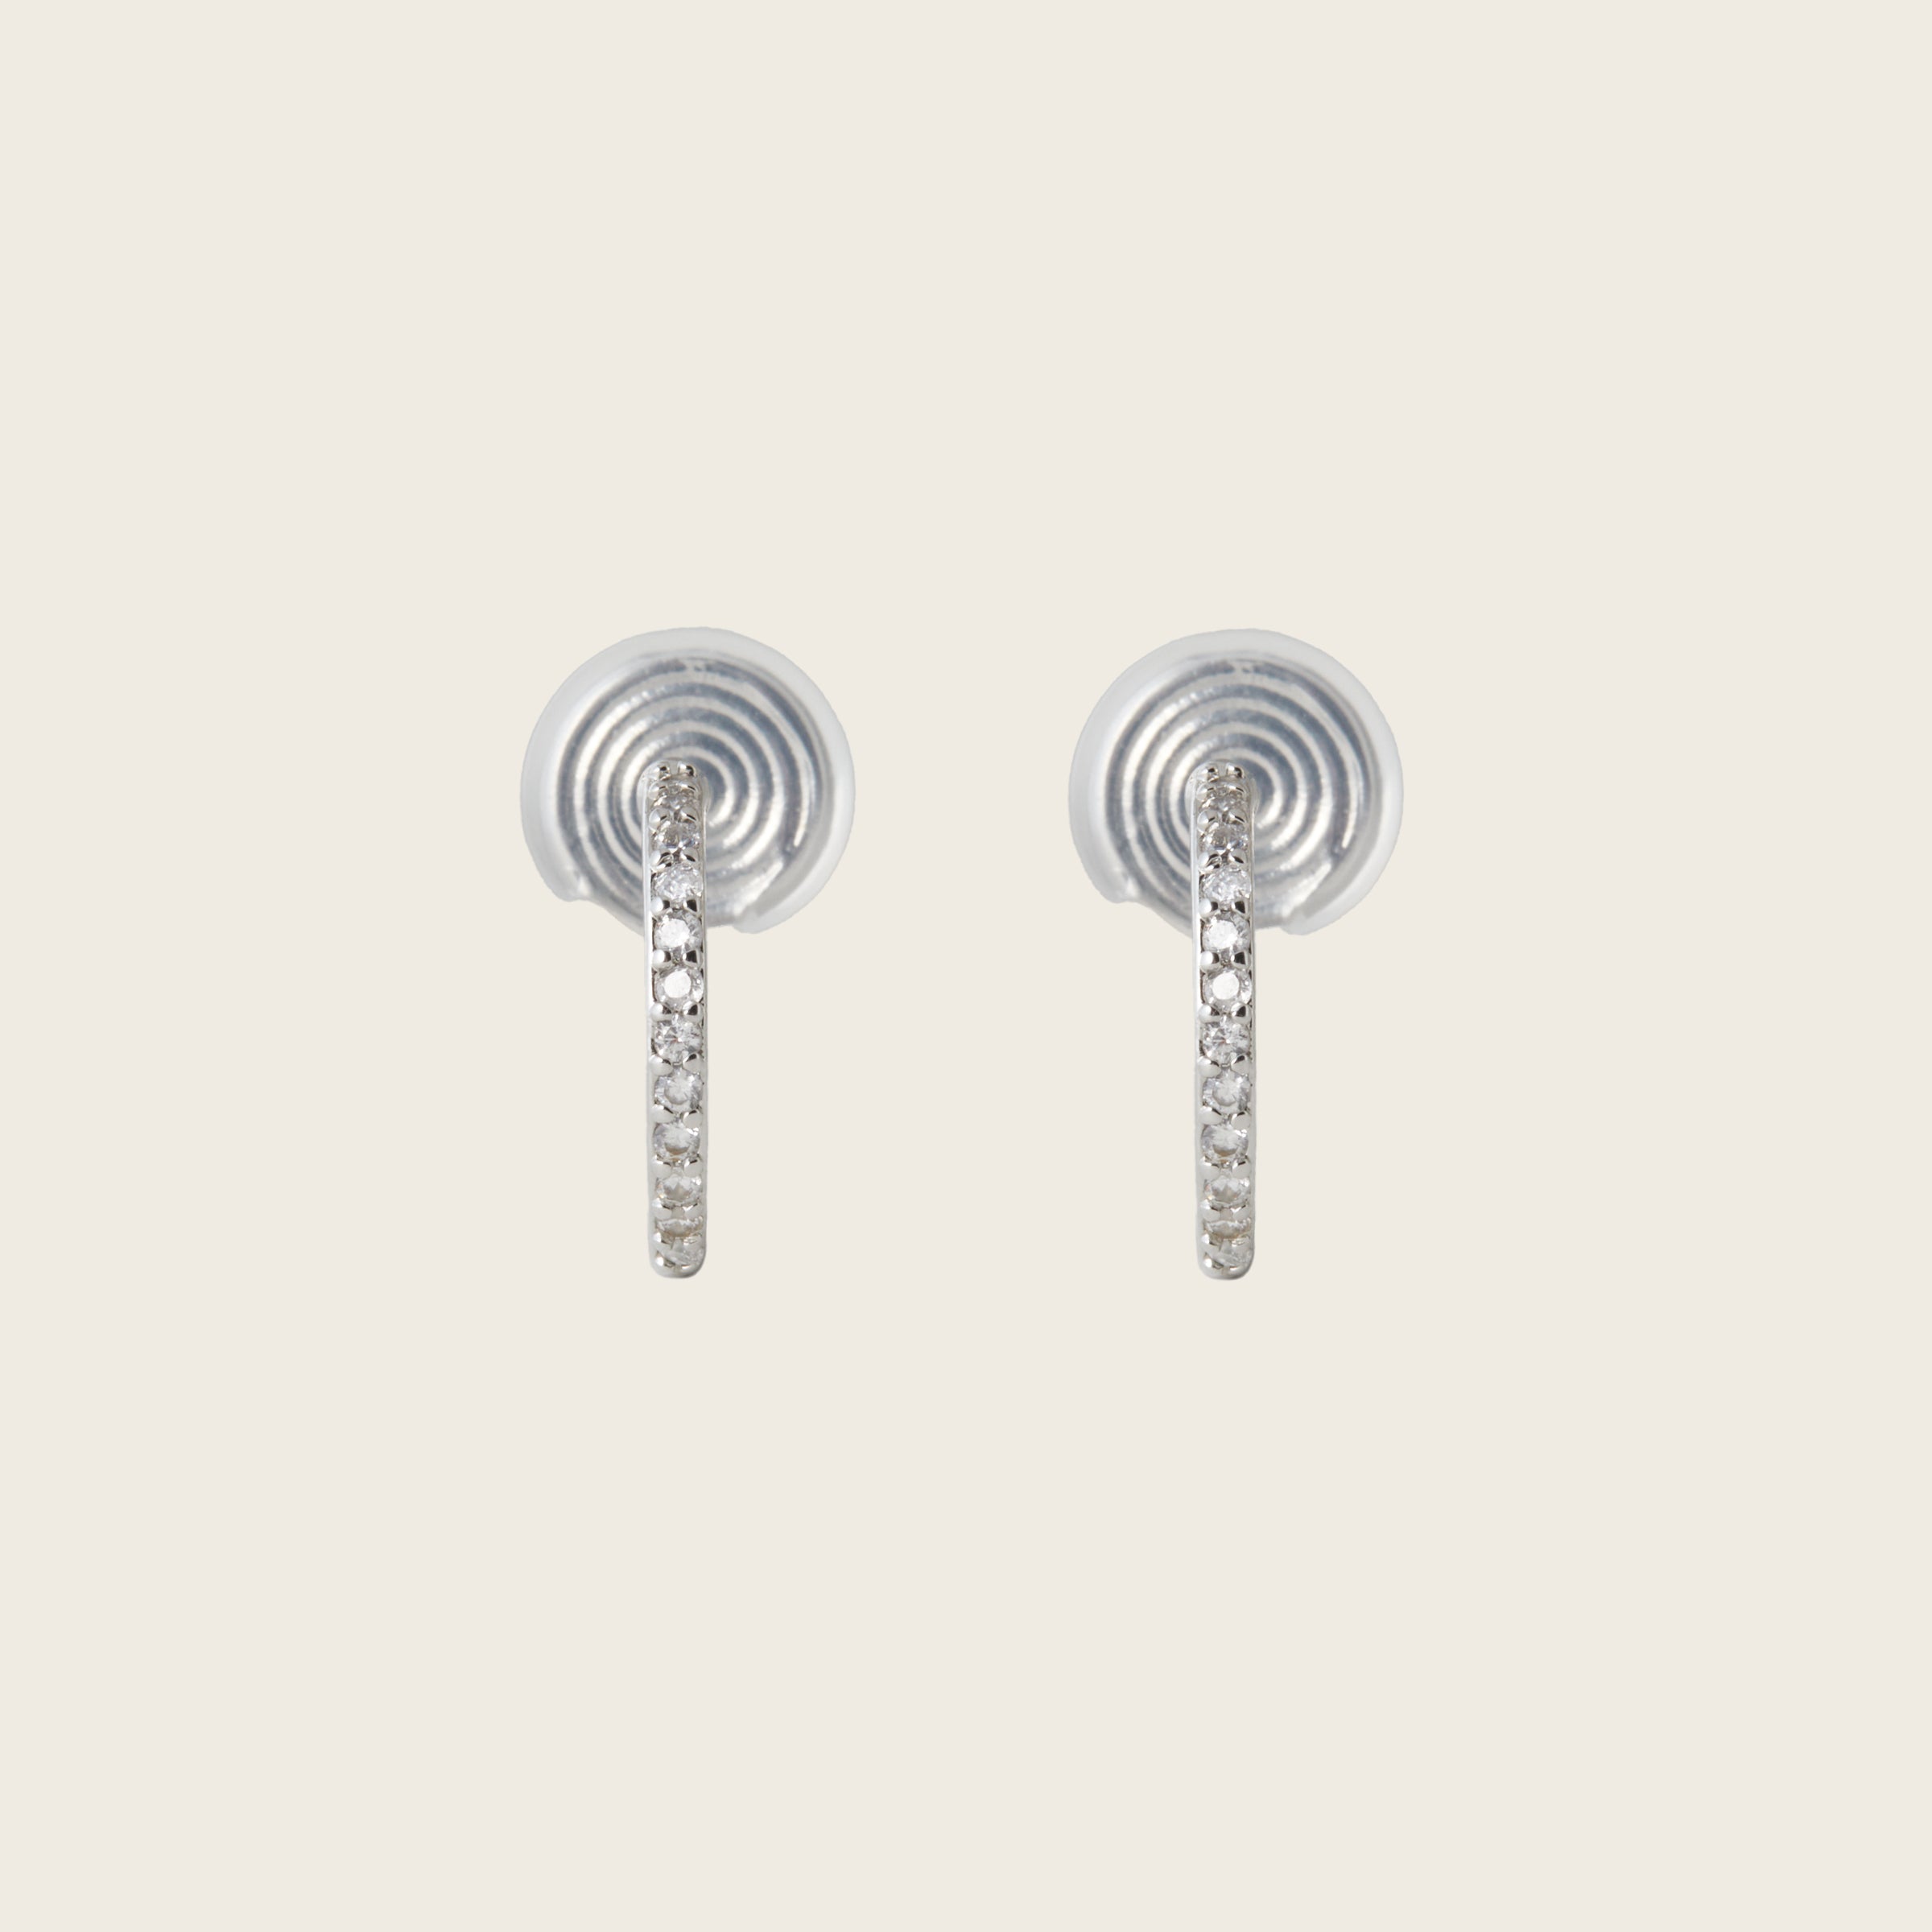 Image of the Medium Pavé Hoop Clip On Earrings in Silver offer a Mosquito Coil Clip-On Closure, making them ideal for Thick/Large Ears, Sensitive Ears, Small/Thin Ears, Stretched/Healing Ears, and Keloid Prone Ears. They provide an average comfortable wear duration of 24 hours with a medium secure hold, and can be gently adjusted by squeezing the padding forward once on the ear. Please note that this item is only one pair.